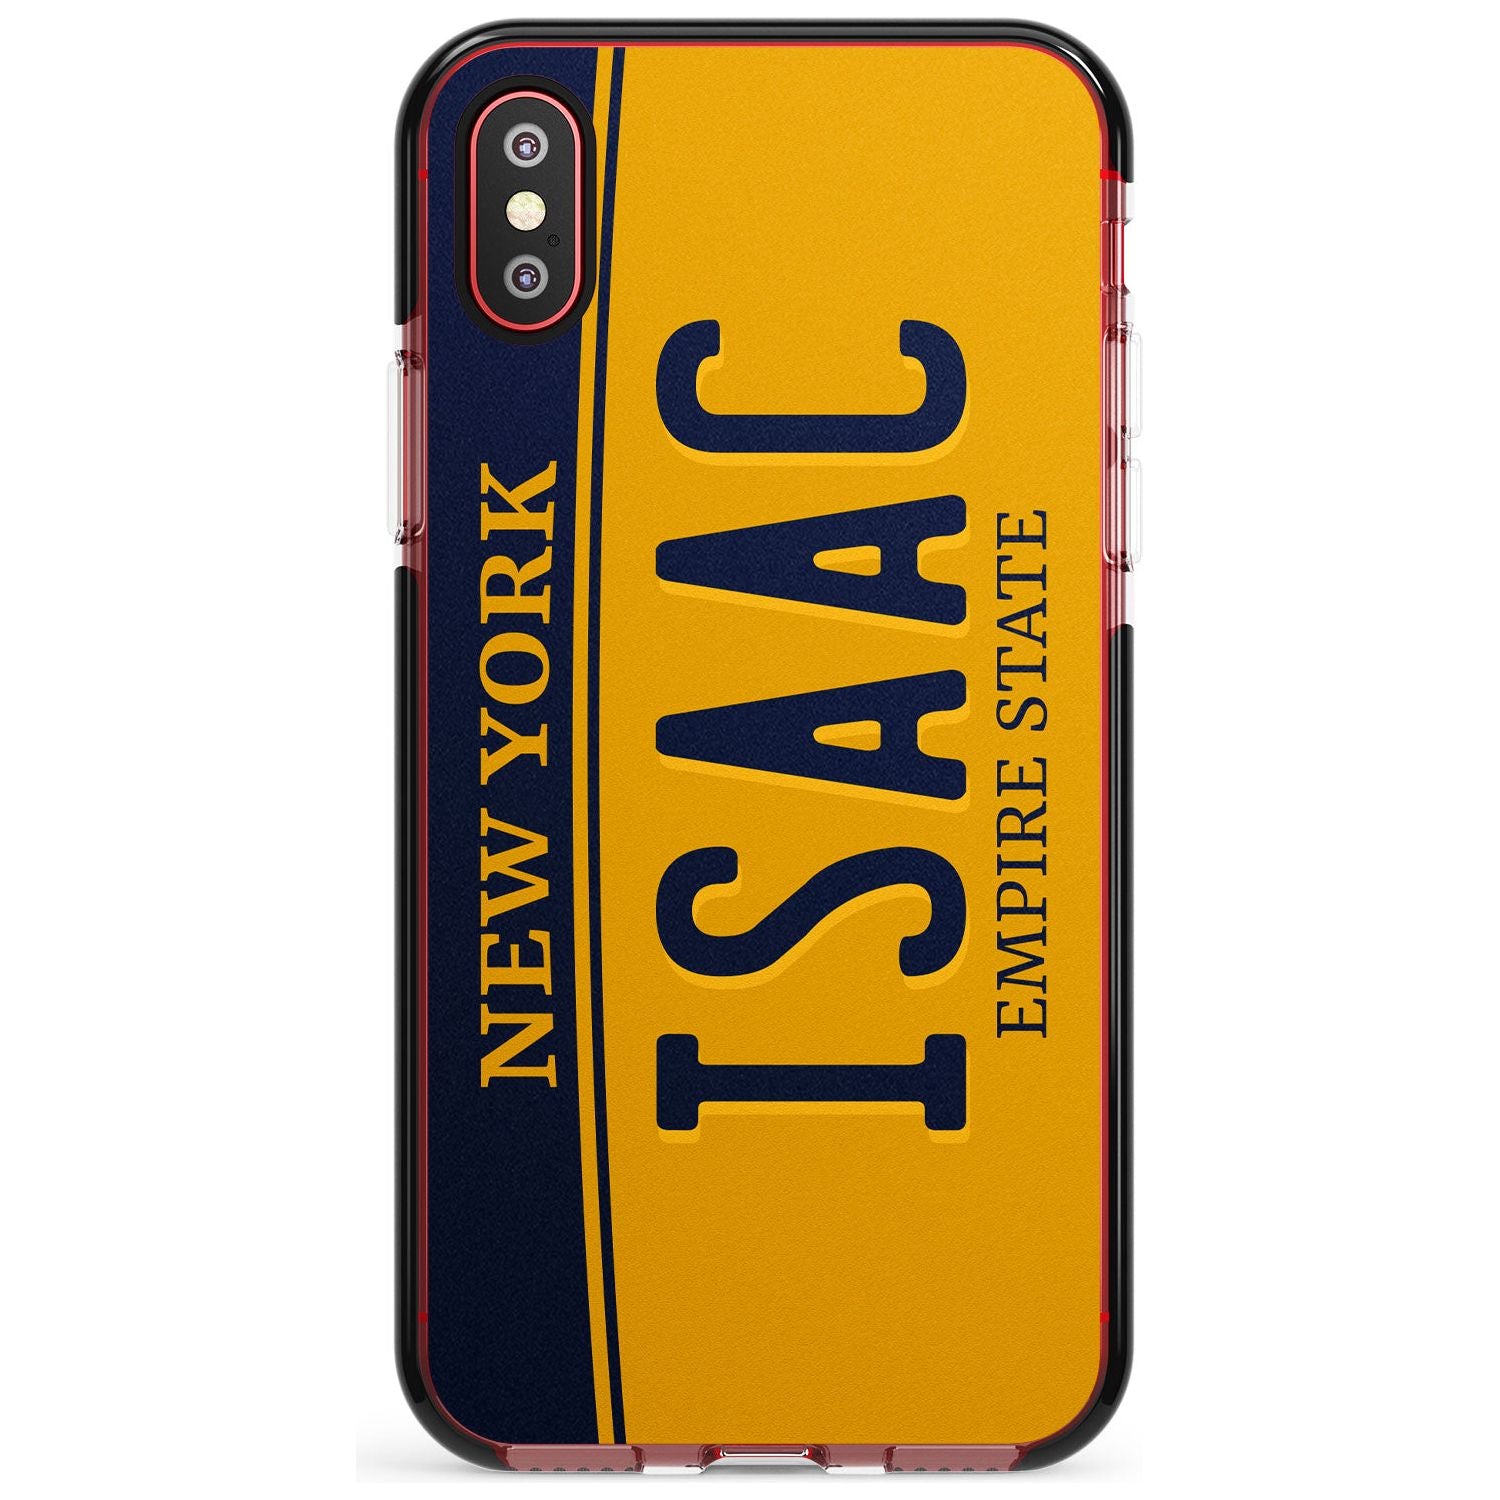 New York License Plate Pink Fade Impact Phone Case for iPhone X XS Max XR